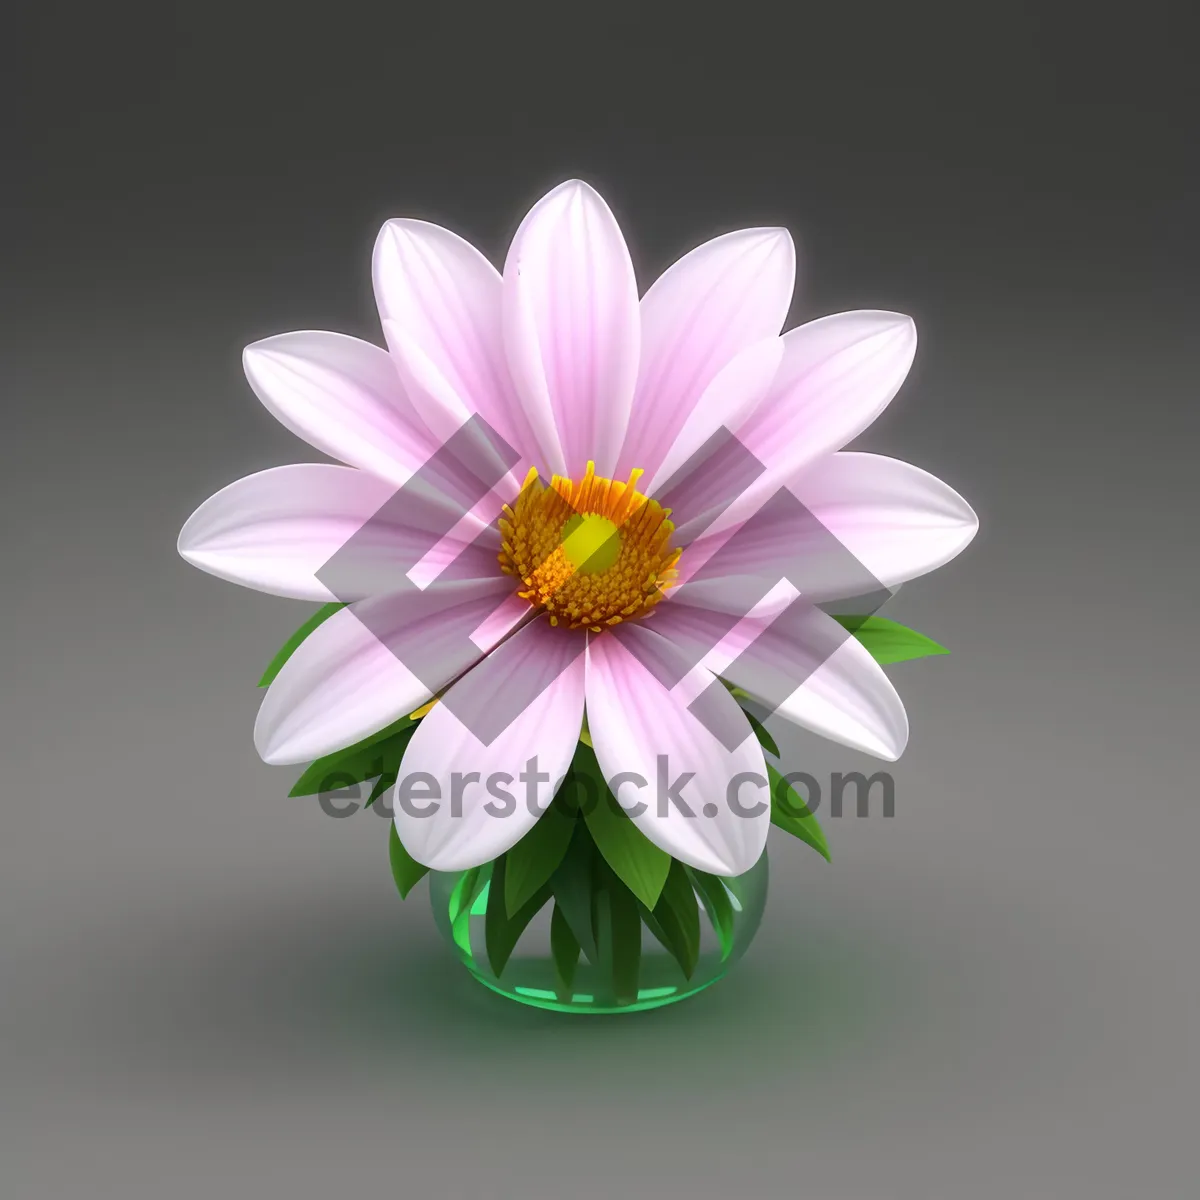 Picture of  Vibrant Pink Daisy Blossom in Summer Garden